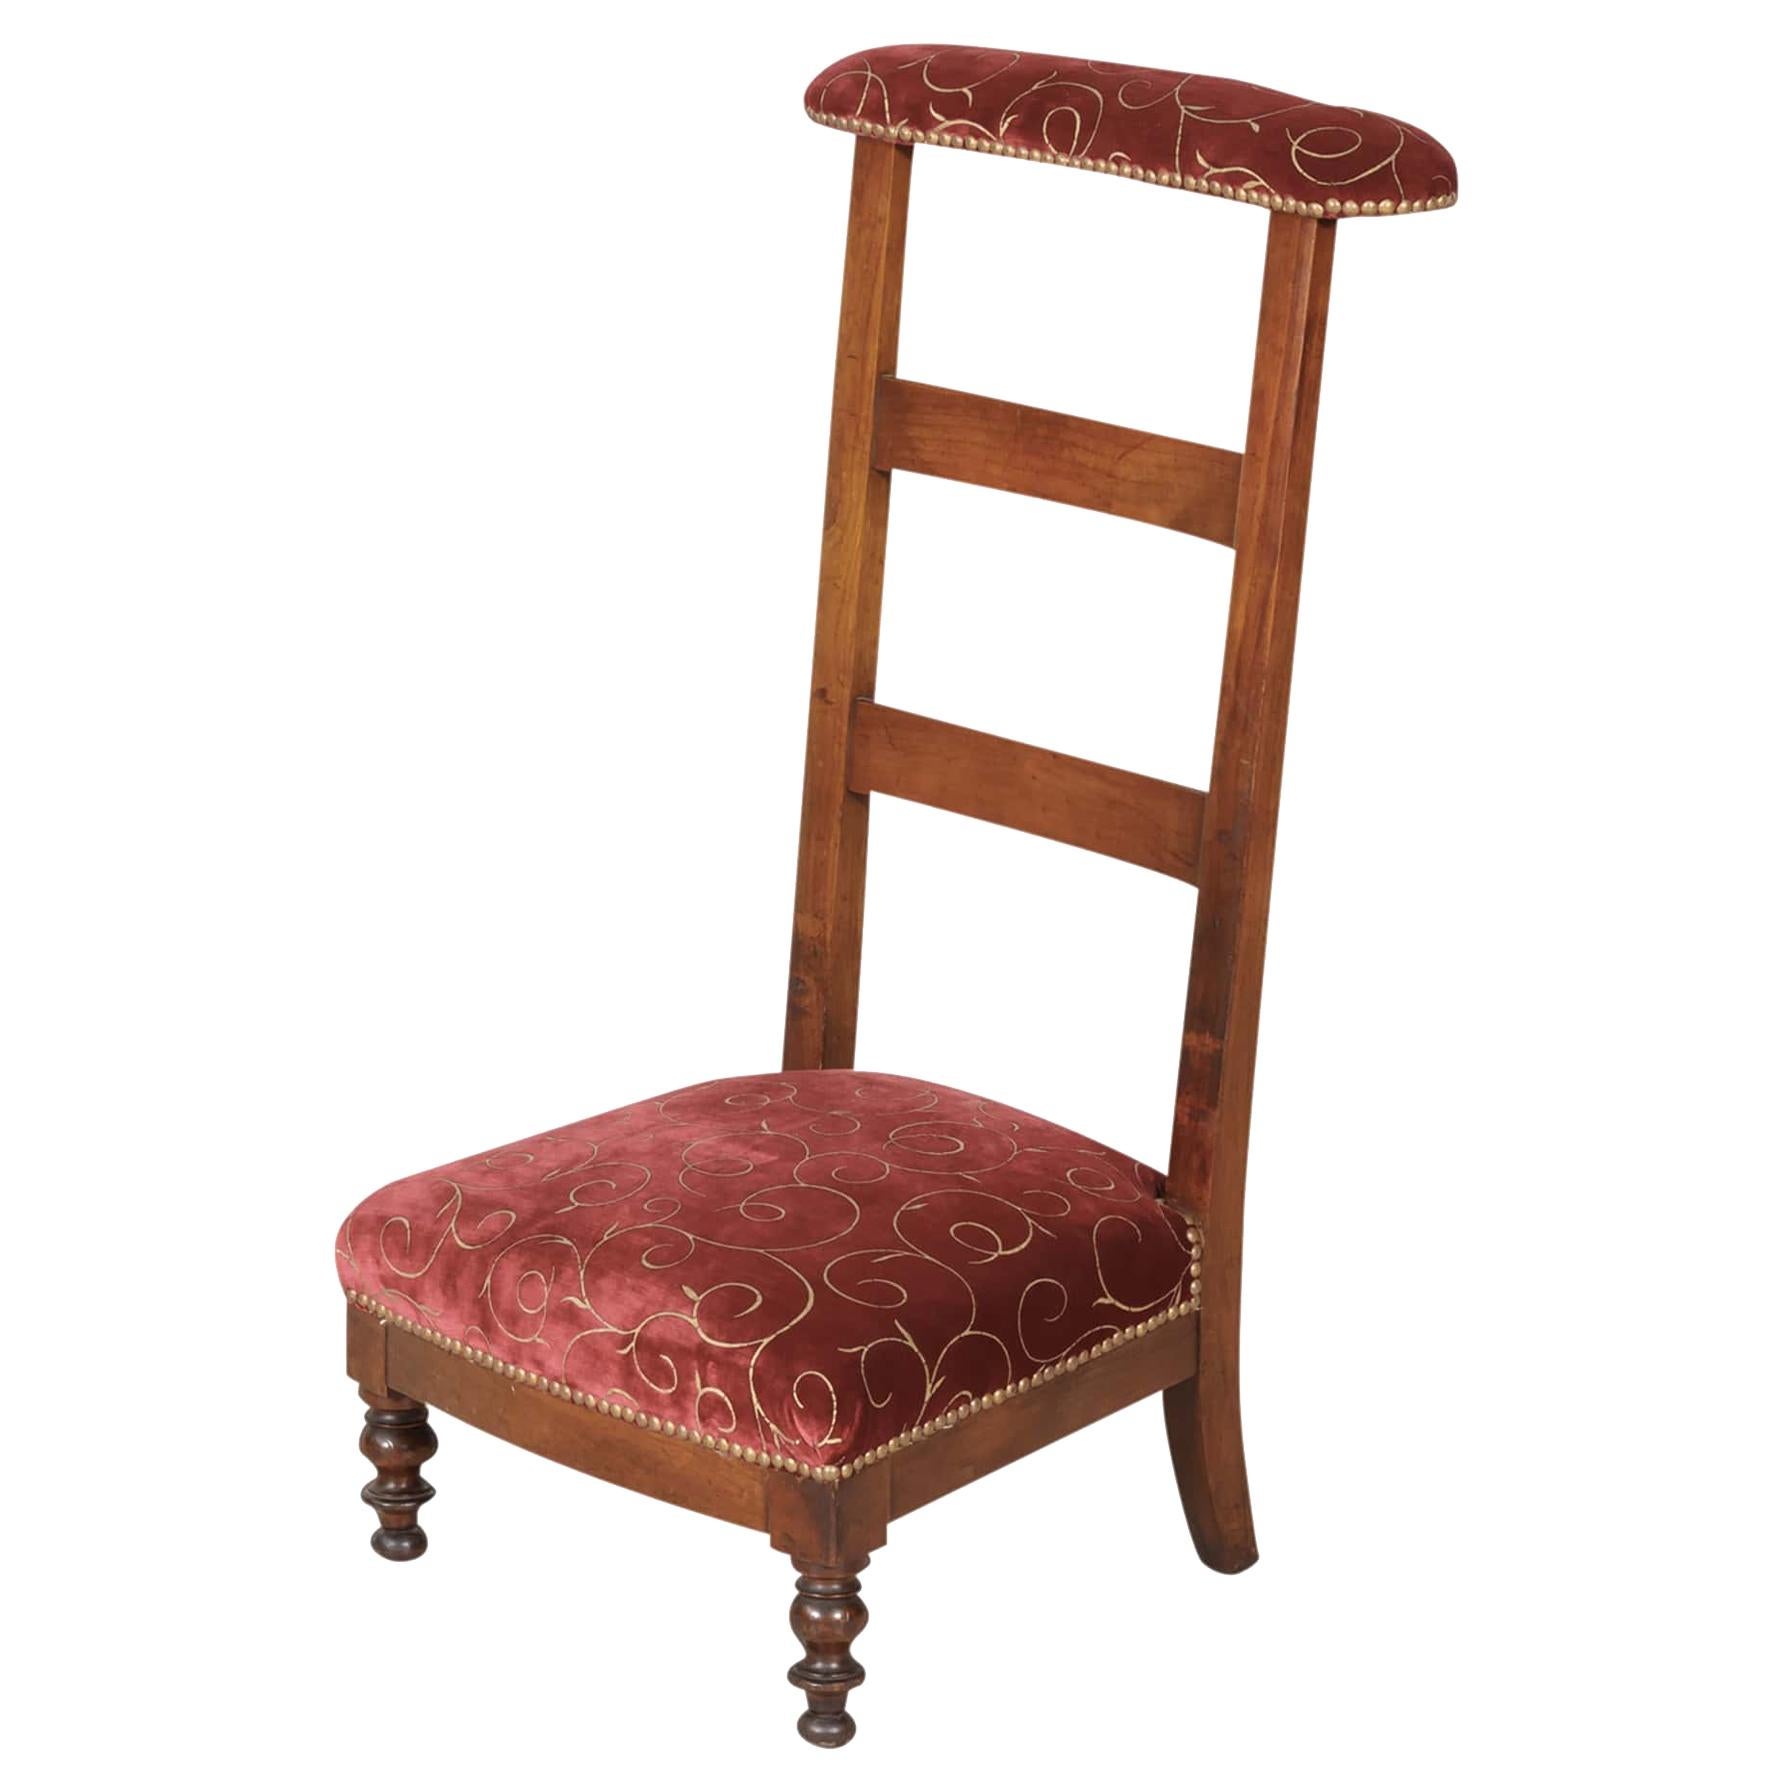 Country French Napoleon III Period Ladder Back Prie Dieu or Prayer Chair